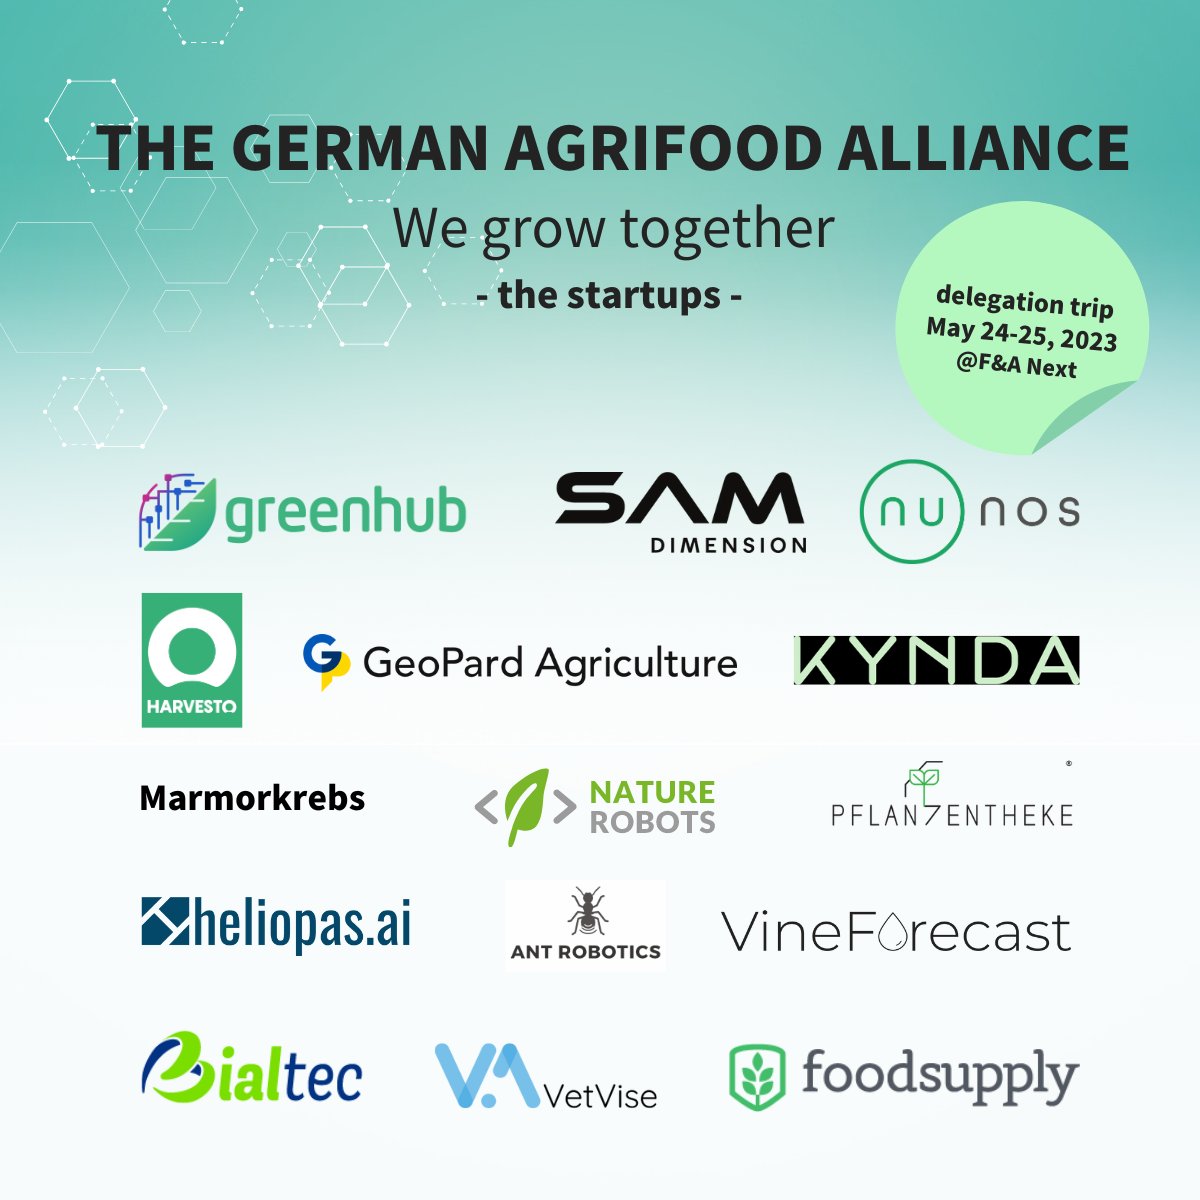 Read here about the status of the New German #AgriFood #Ecosystem. fanext.com/status-of-the-… Tomorrow we will embark on a delegation trip to F&A Next in Wageningen together with 8 partners and 15 startups. Let's meet there! #startups #network #wageningen #fandanext